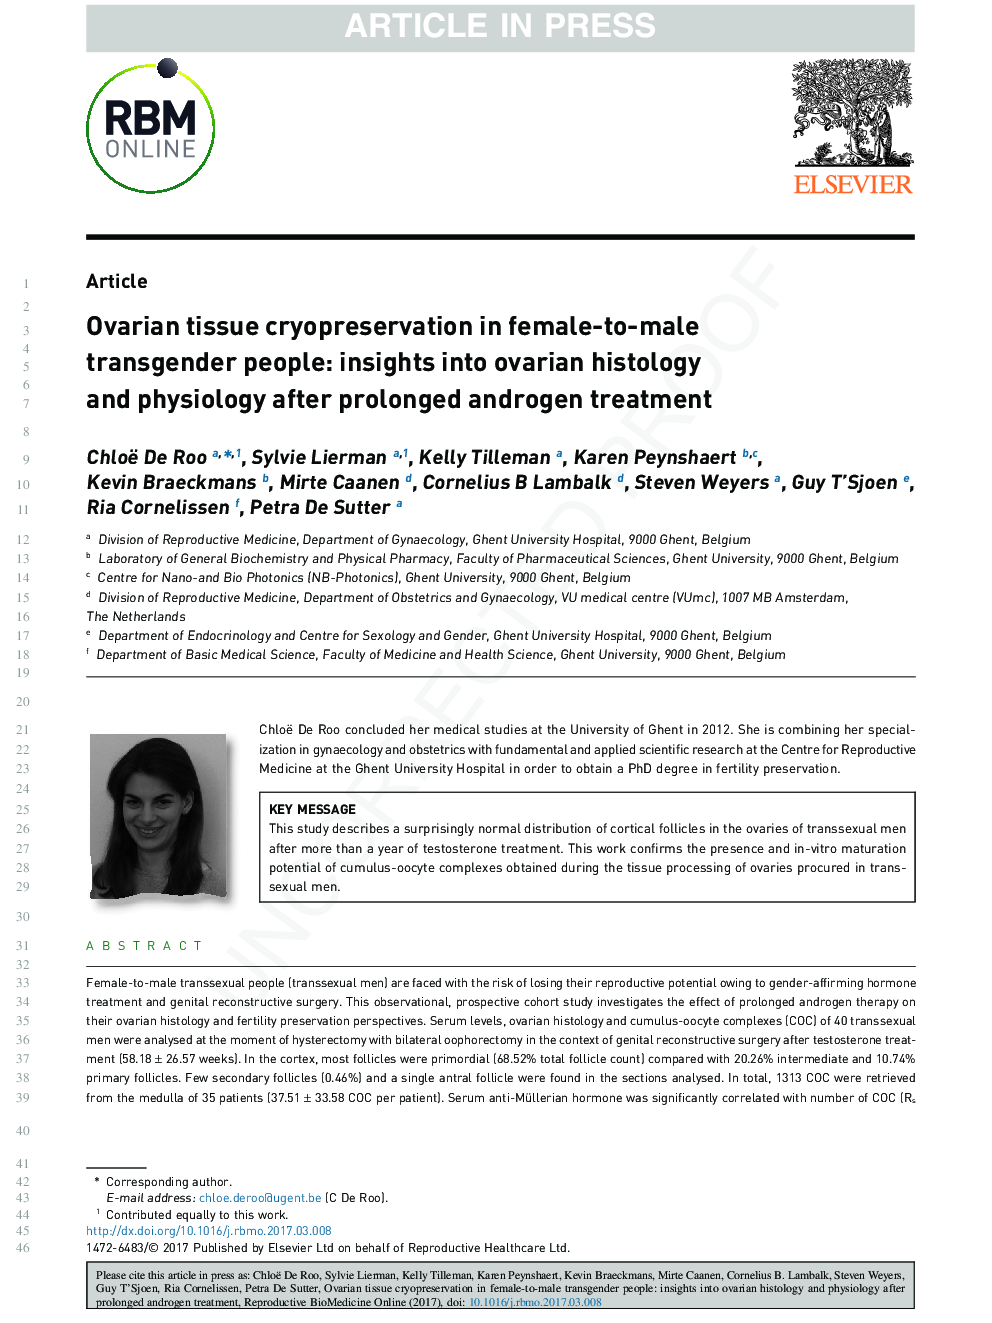 Ovarian tissue cryopreservation in female-to-male transgender people: insights into ovarian histology and physiology after prolonged androgen treatment